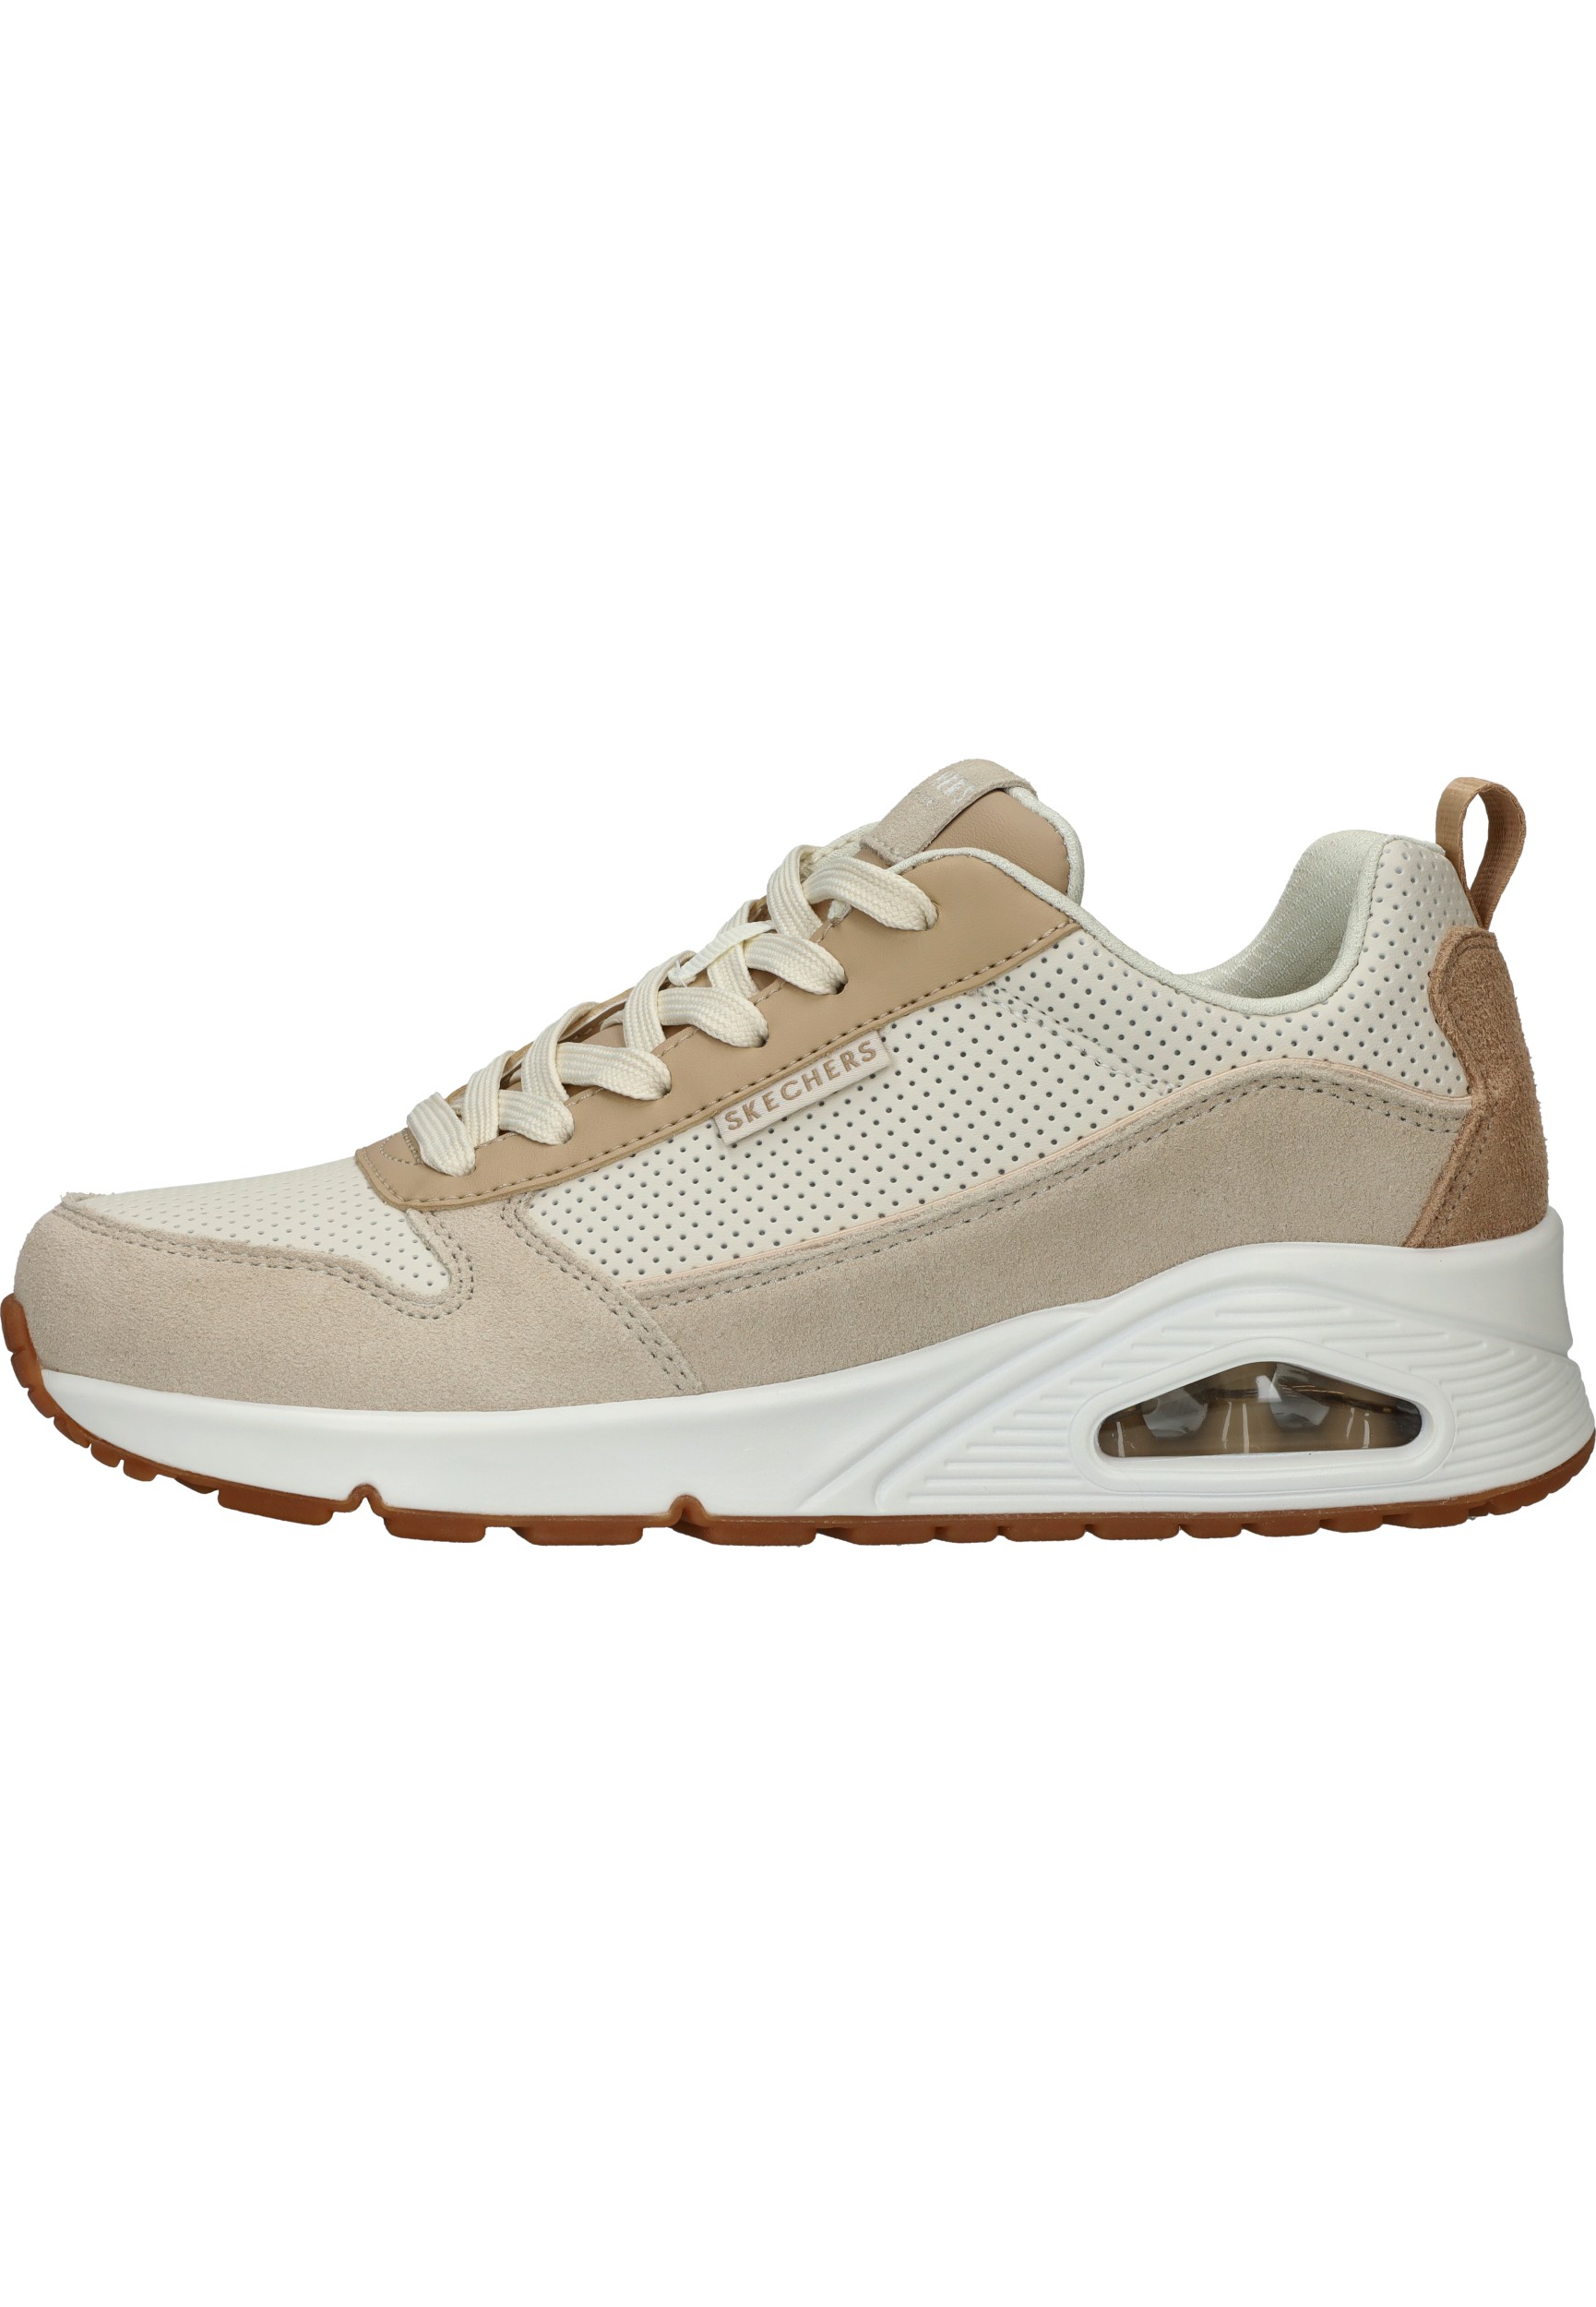 Skechers Uno Two Much Fun Beige Taupe 177105TPNT